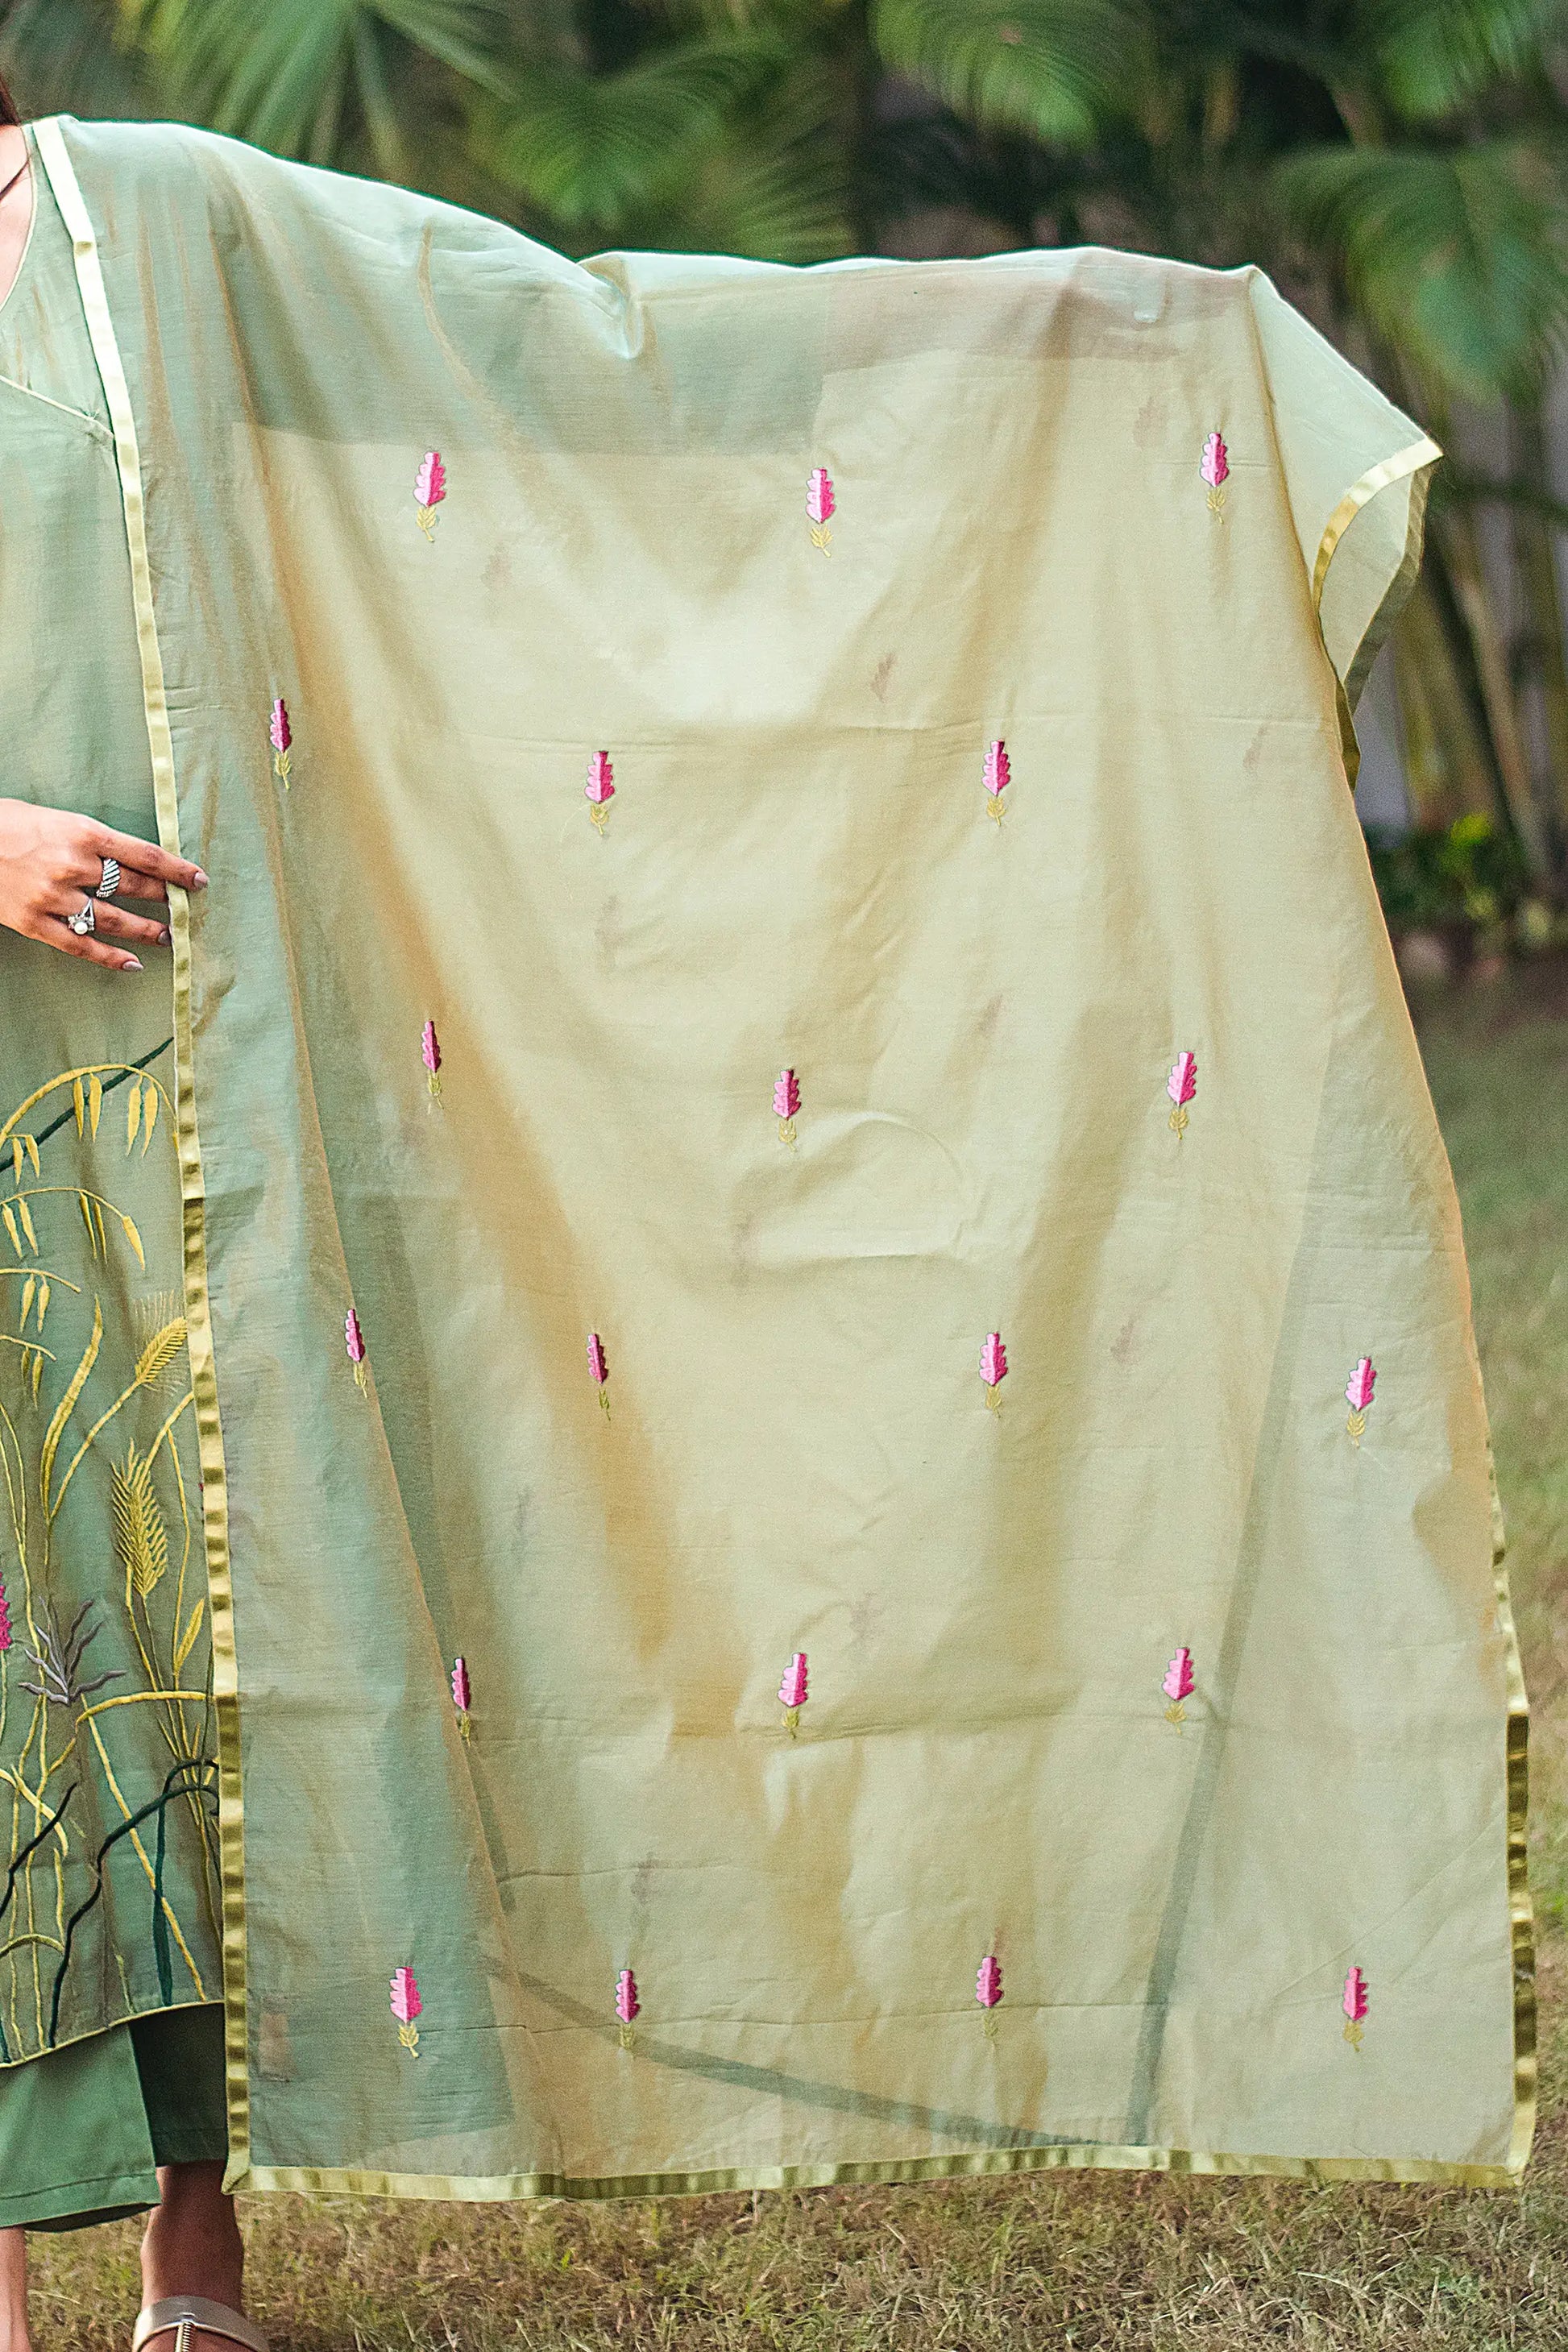 Detail of the green chanderi dupatta embellished with embroidered flowers, as styled by the model.